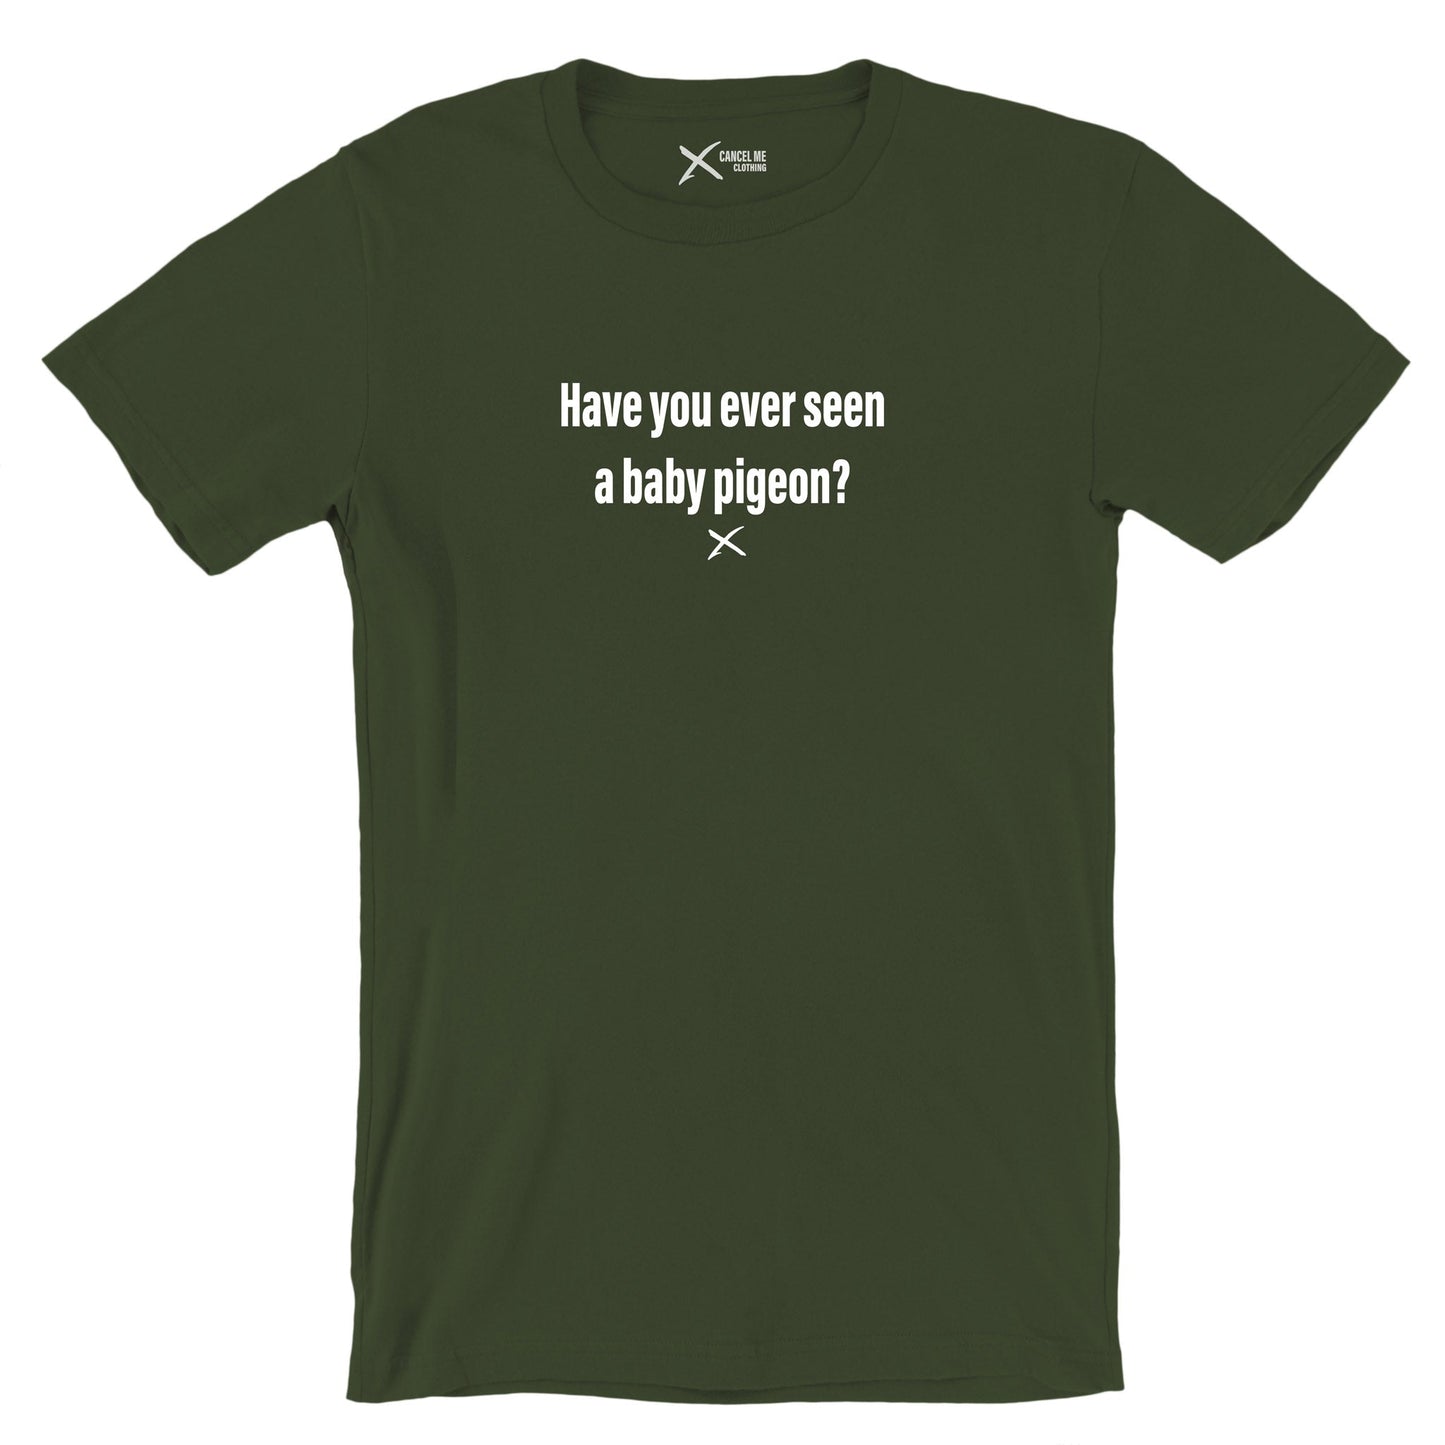 Have you ever seen a baby pigeon? - Shirt